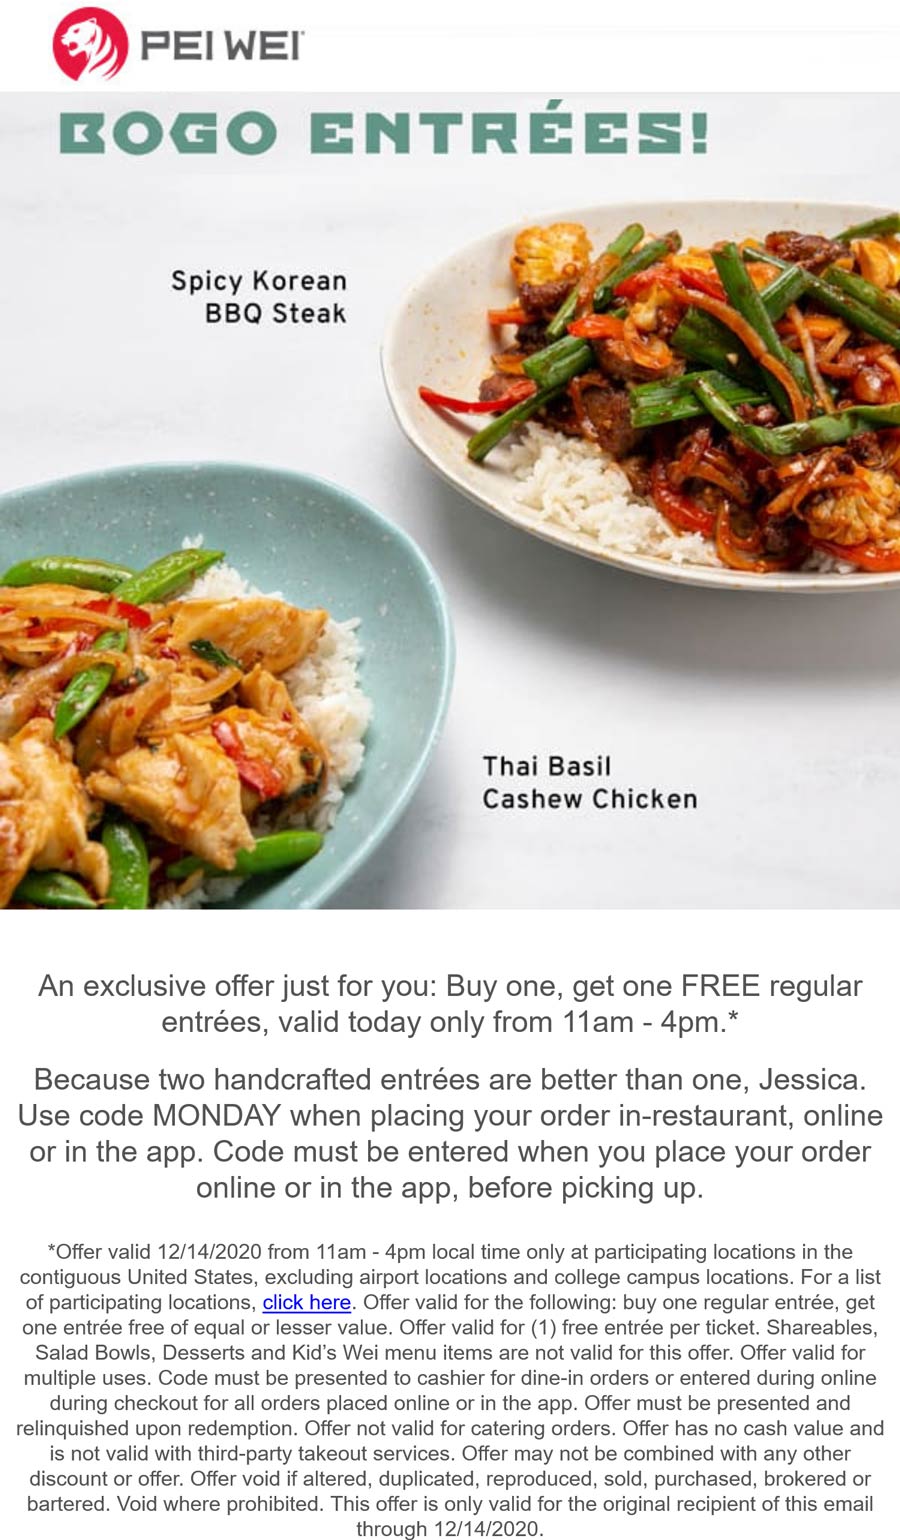 Pei Wei restaurants Coupon  Second lunch entree free today at Pei Wei via promo code MONDAY #peiwei 